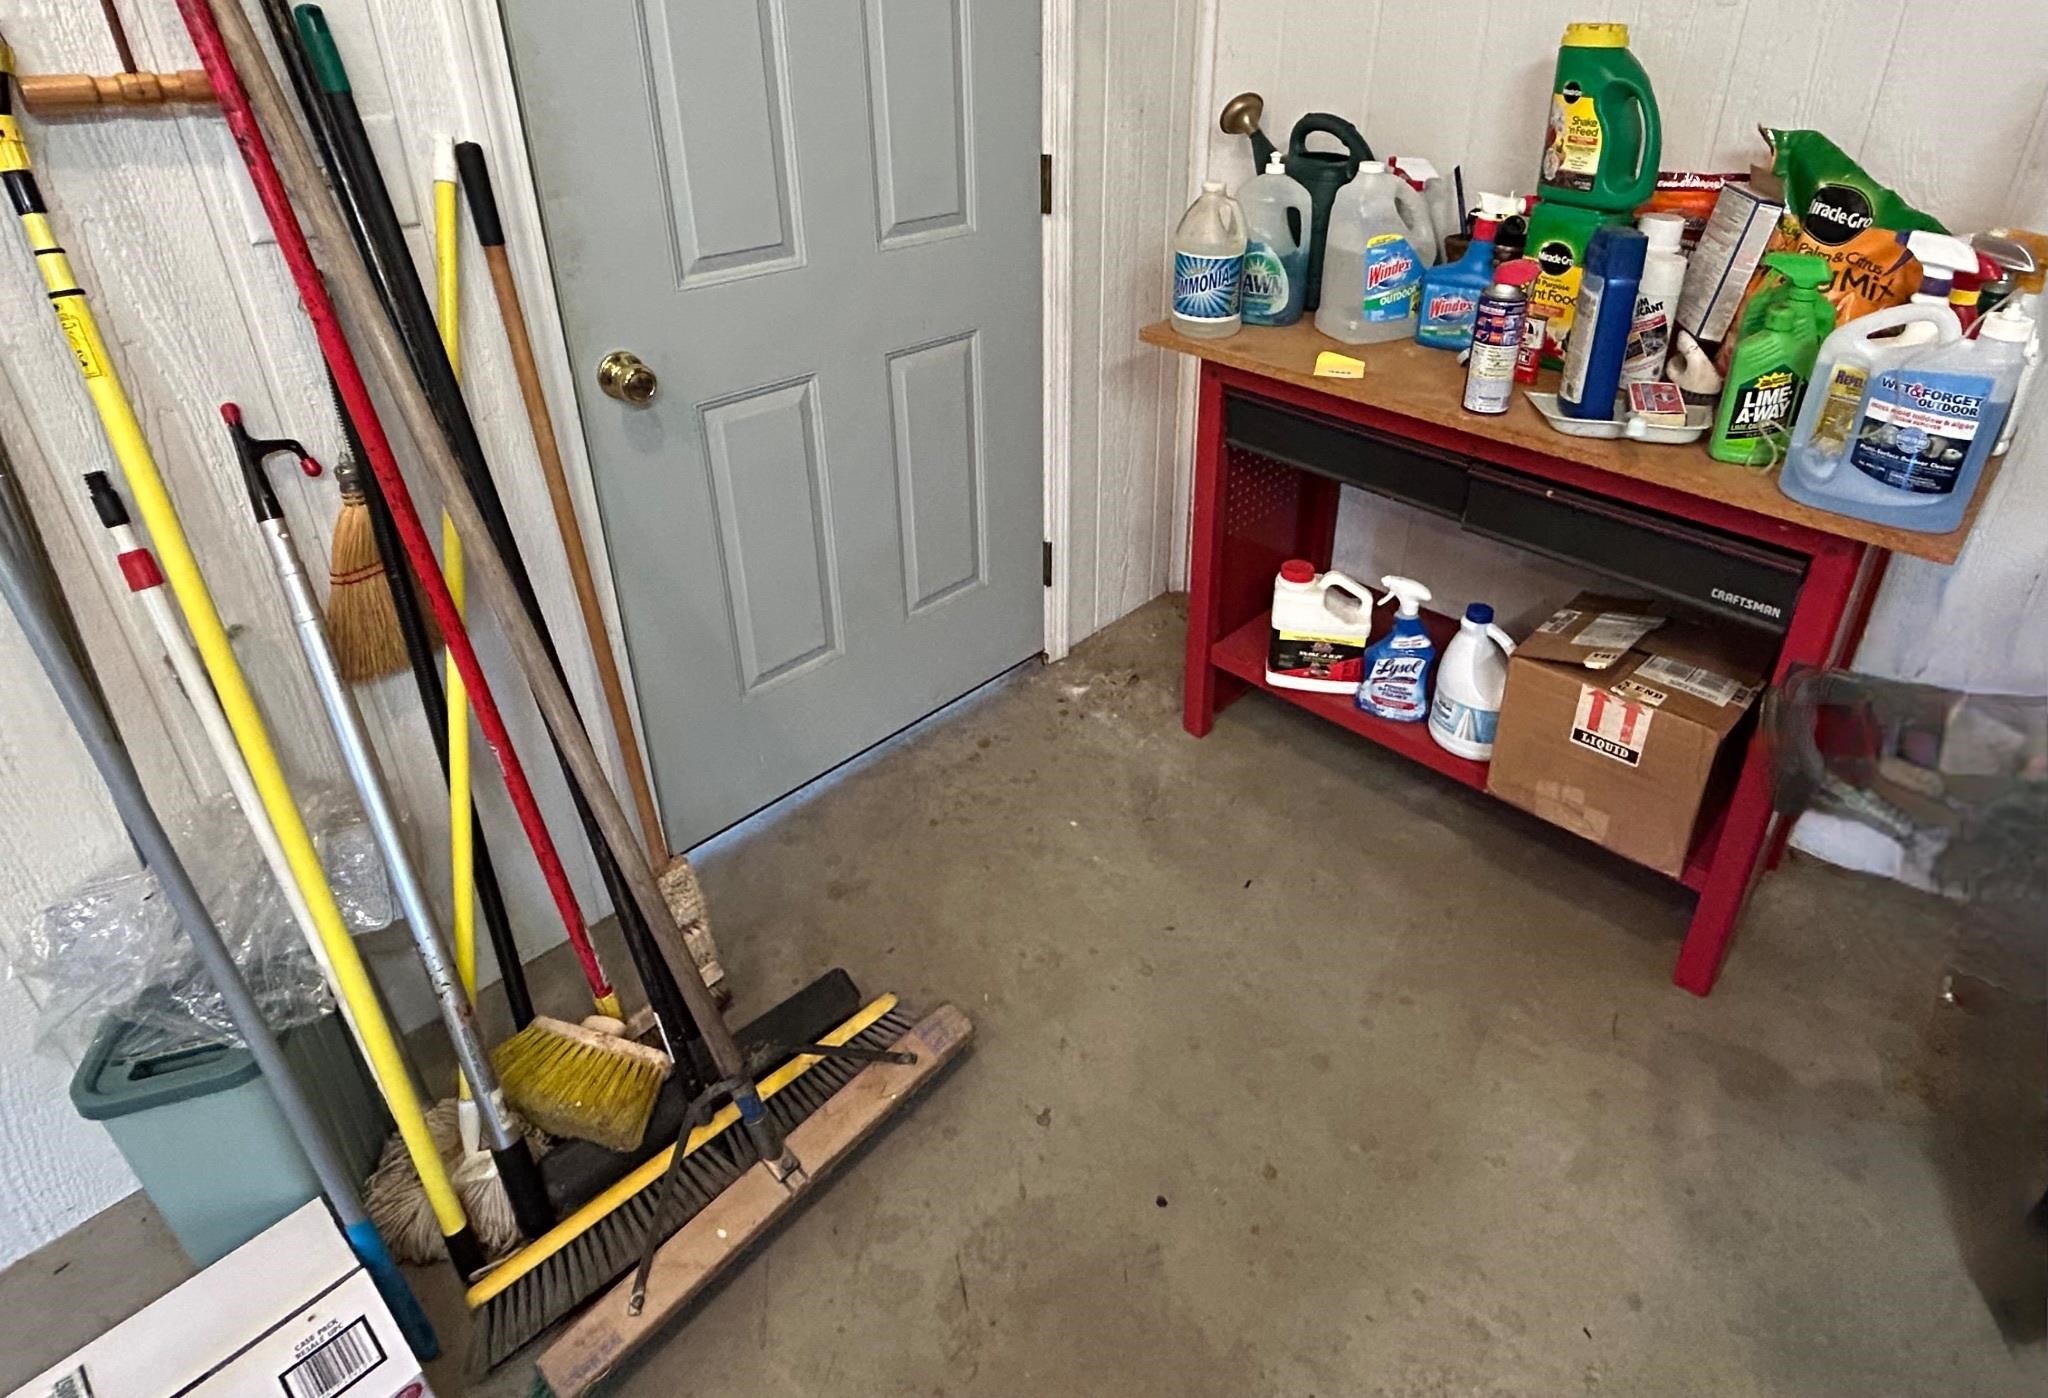 Yard Work & Cleaning Items